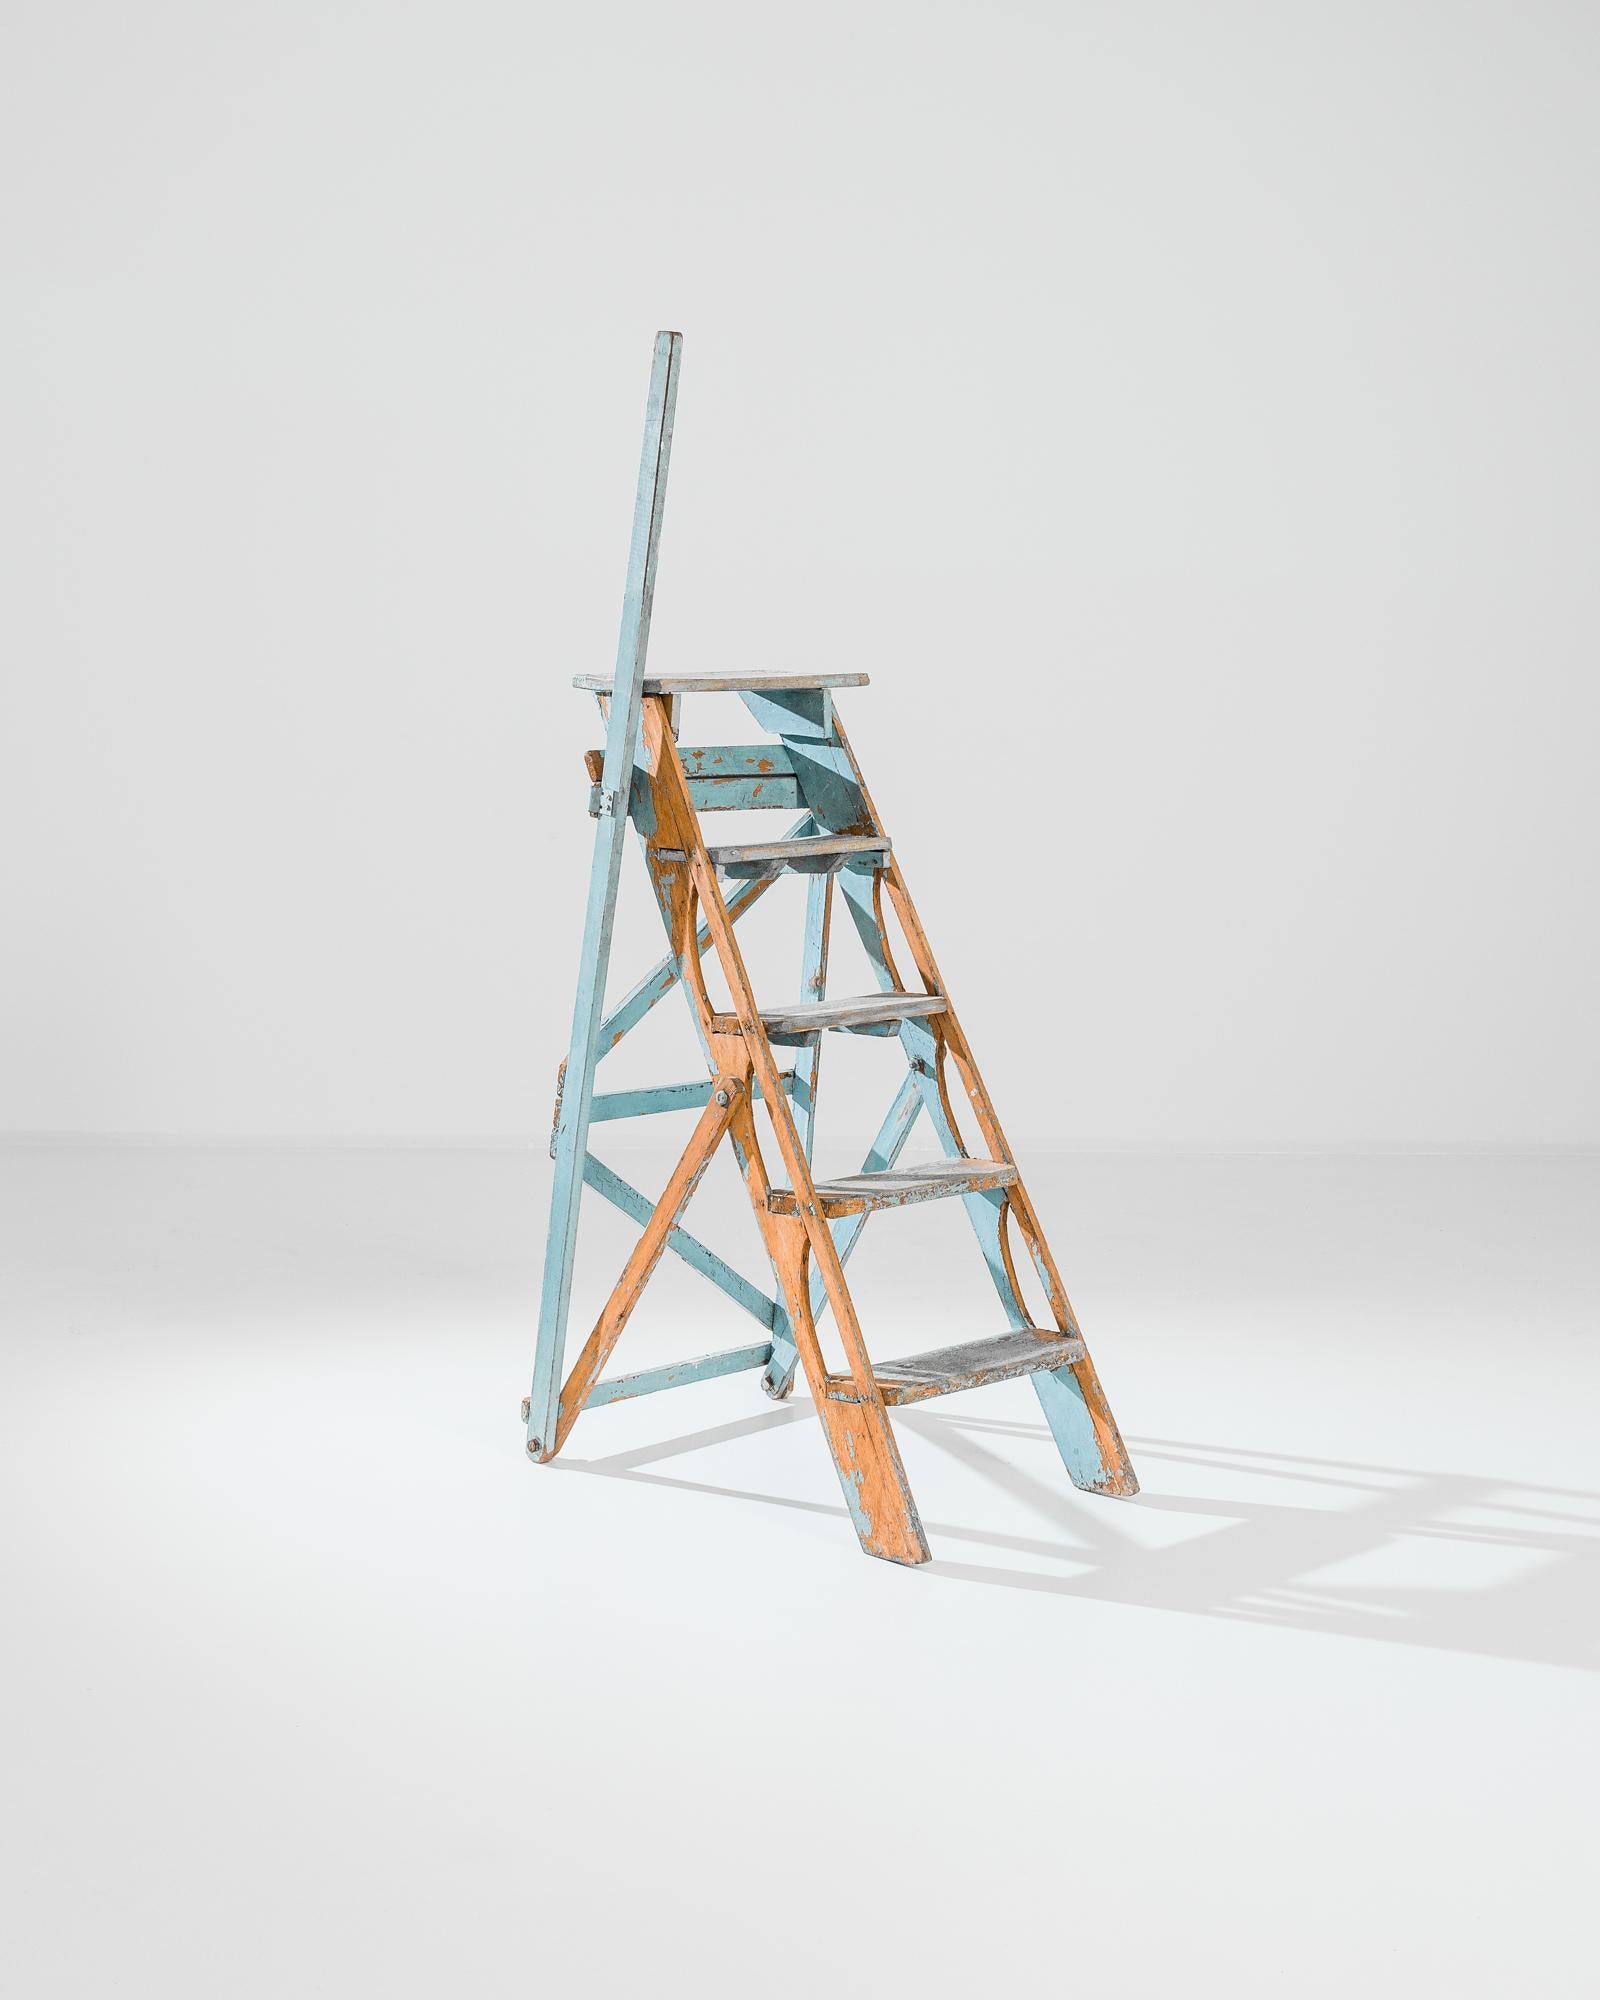 Nearly five feet tall, this folding wooden ladder was made in France, circa 1900. Optimistic light blue and orange colors of the original finish lend a cheerful touch, while practical elements also make playful decorations: cross braces and carved